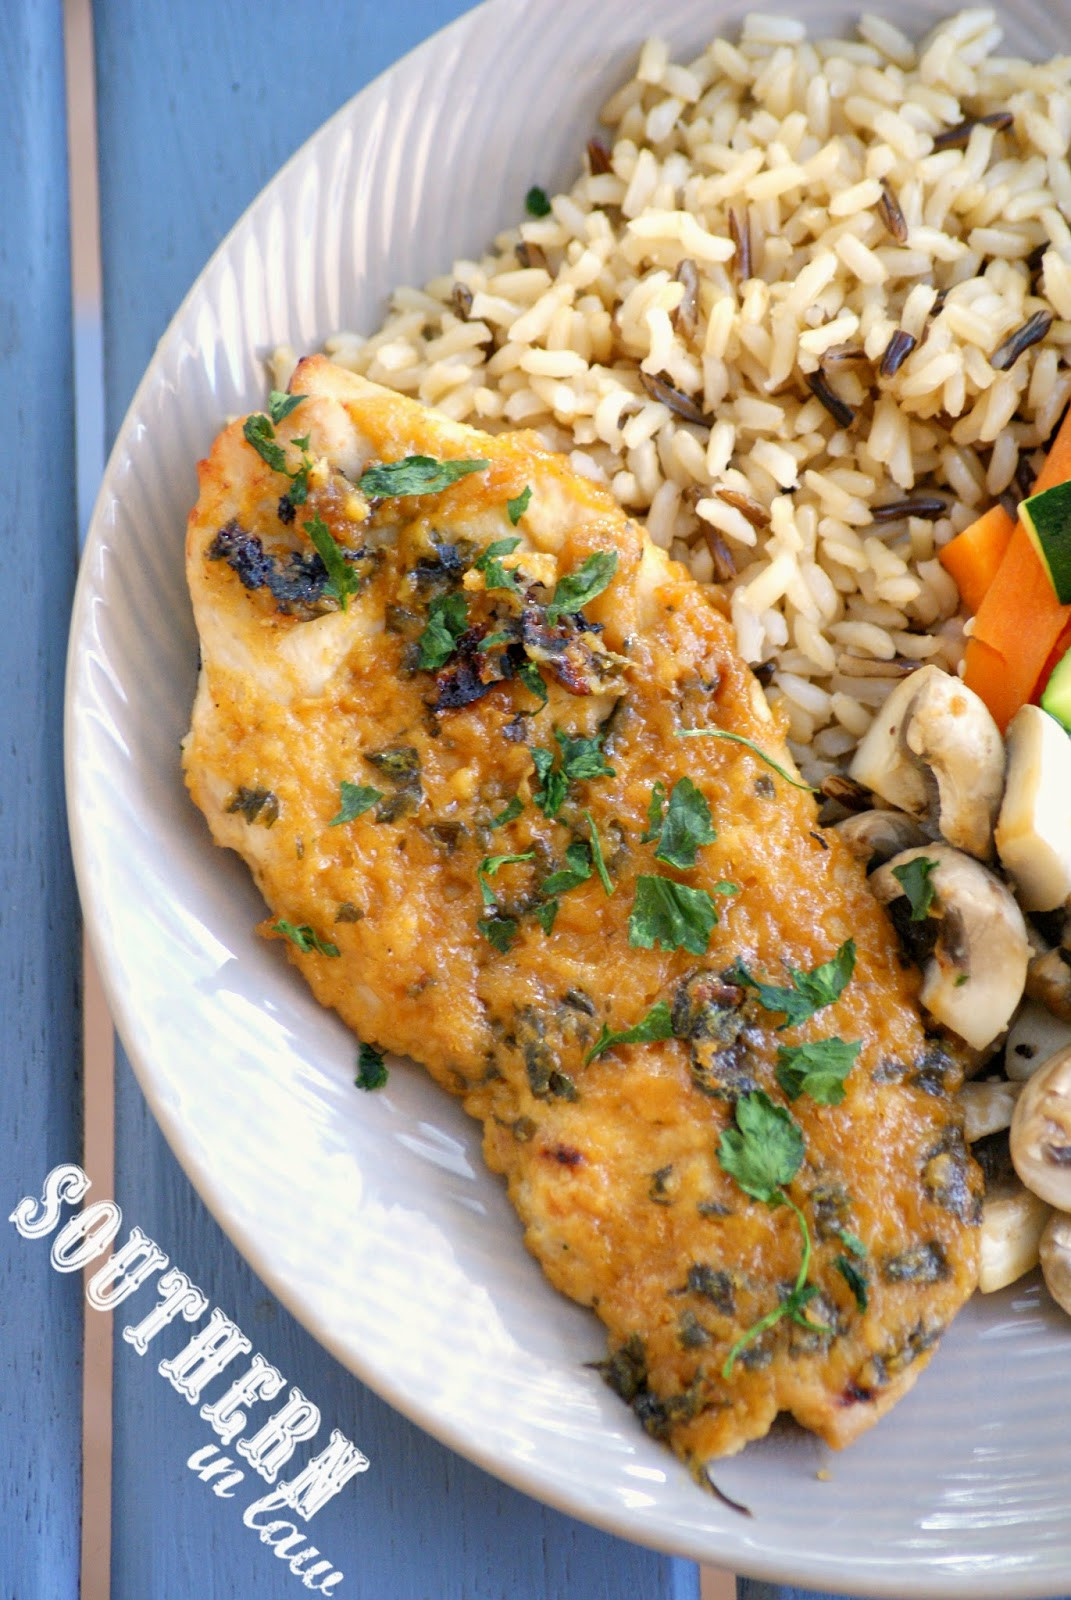 Low Calorie Baked Chicken
 Southern In Law Recipe Healthy Maple Dijon Baked Chicken